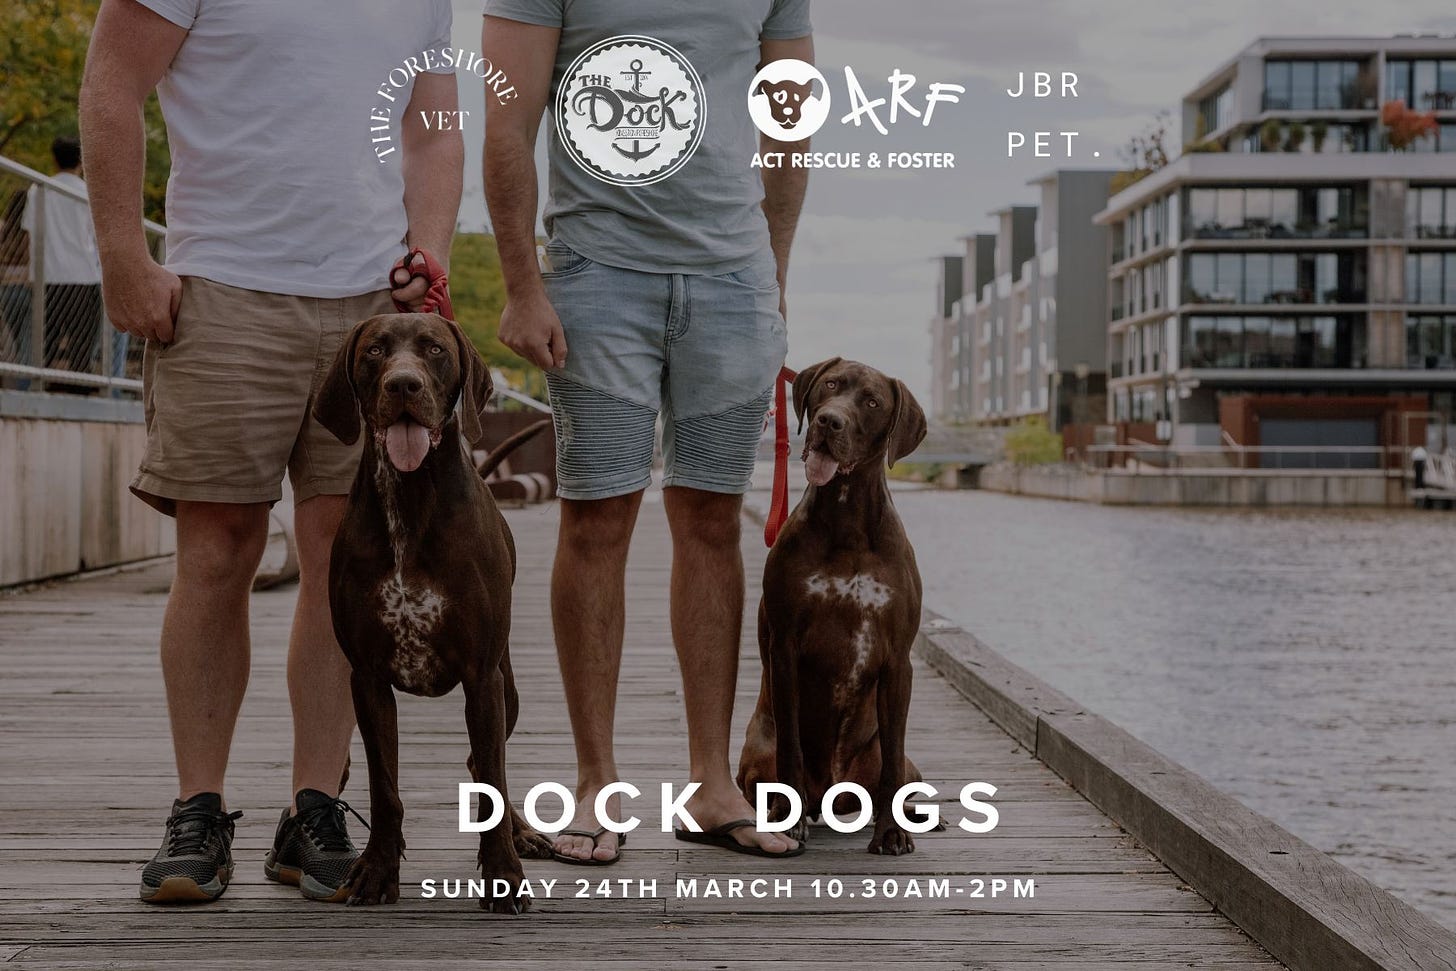 May be an image of 2 people, dog and text that says 'FORESHORE VET JBR ARF ACT RESCUE AC& & FOSTER PET DOCK DOGS SUNDAY 24TH MARCH 10.30AM-2PM'